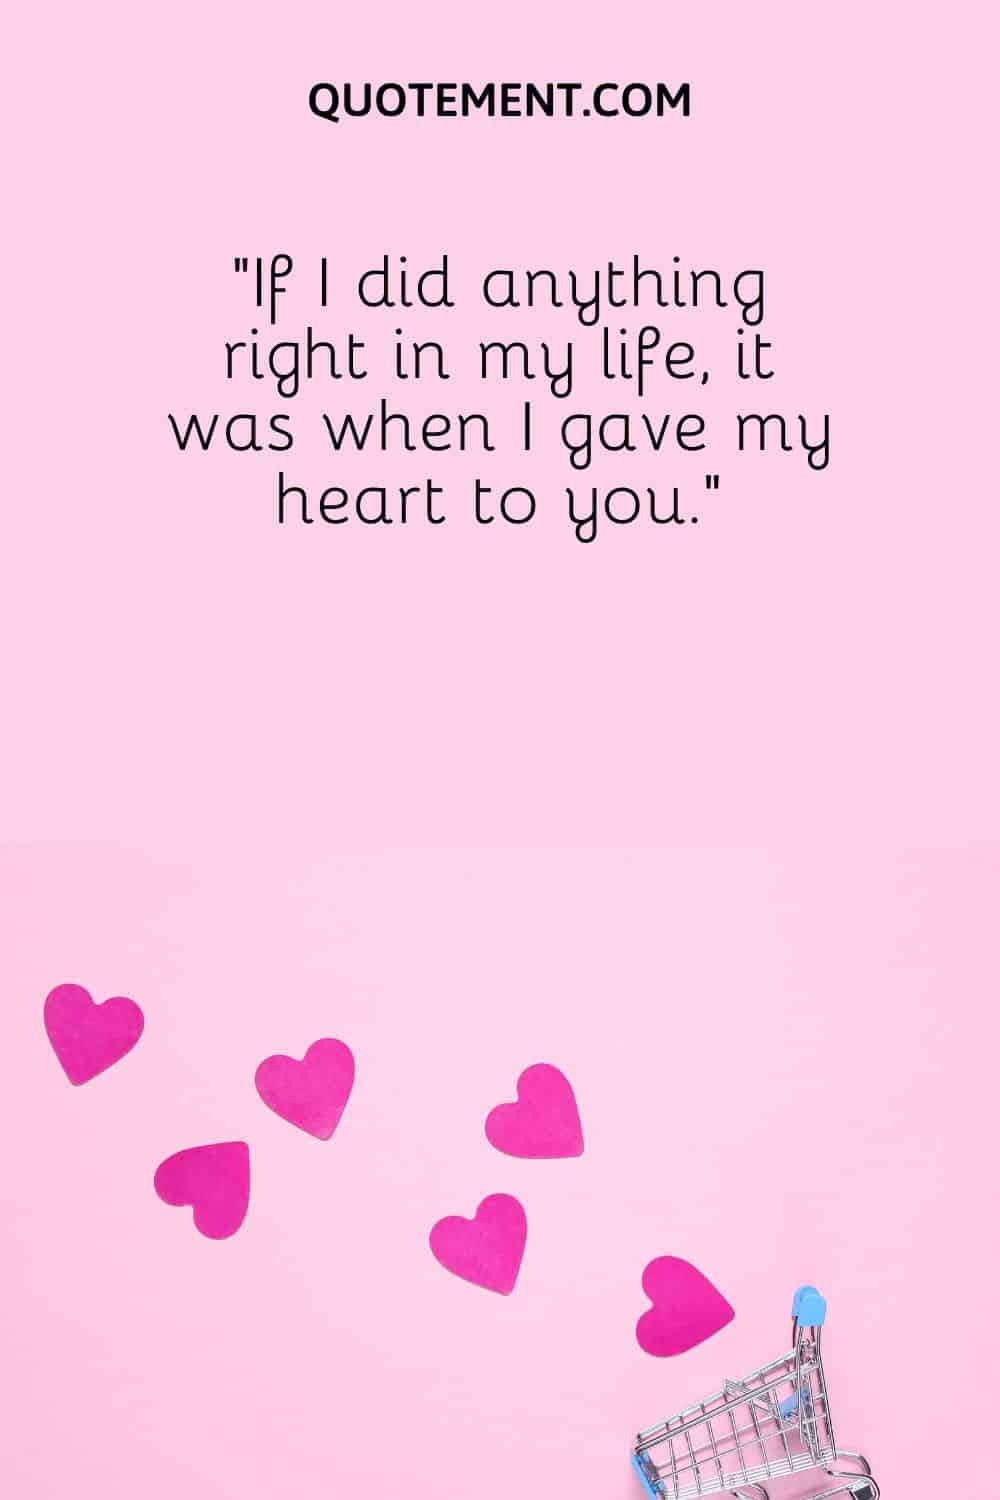 “If I did anything right in my life, it was when I gave my heart to you.”